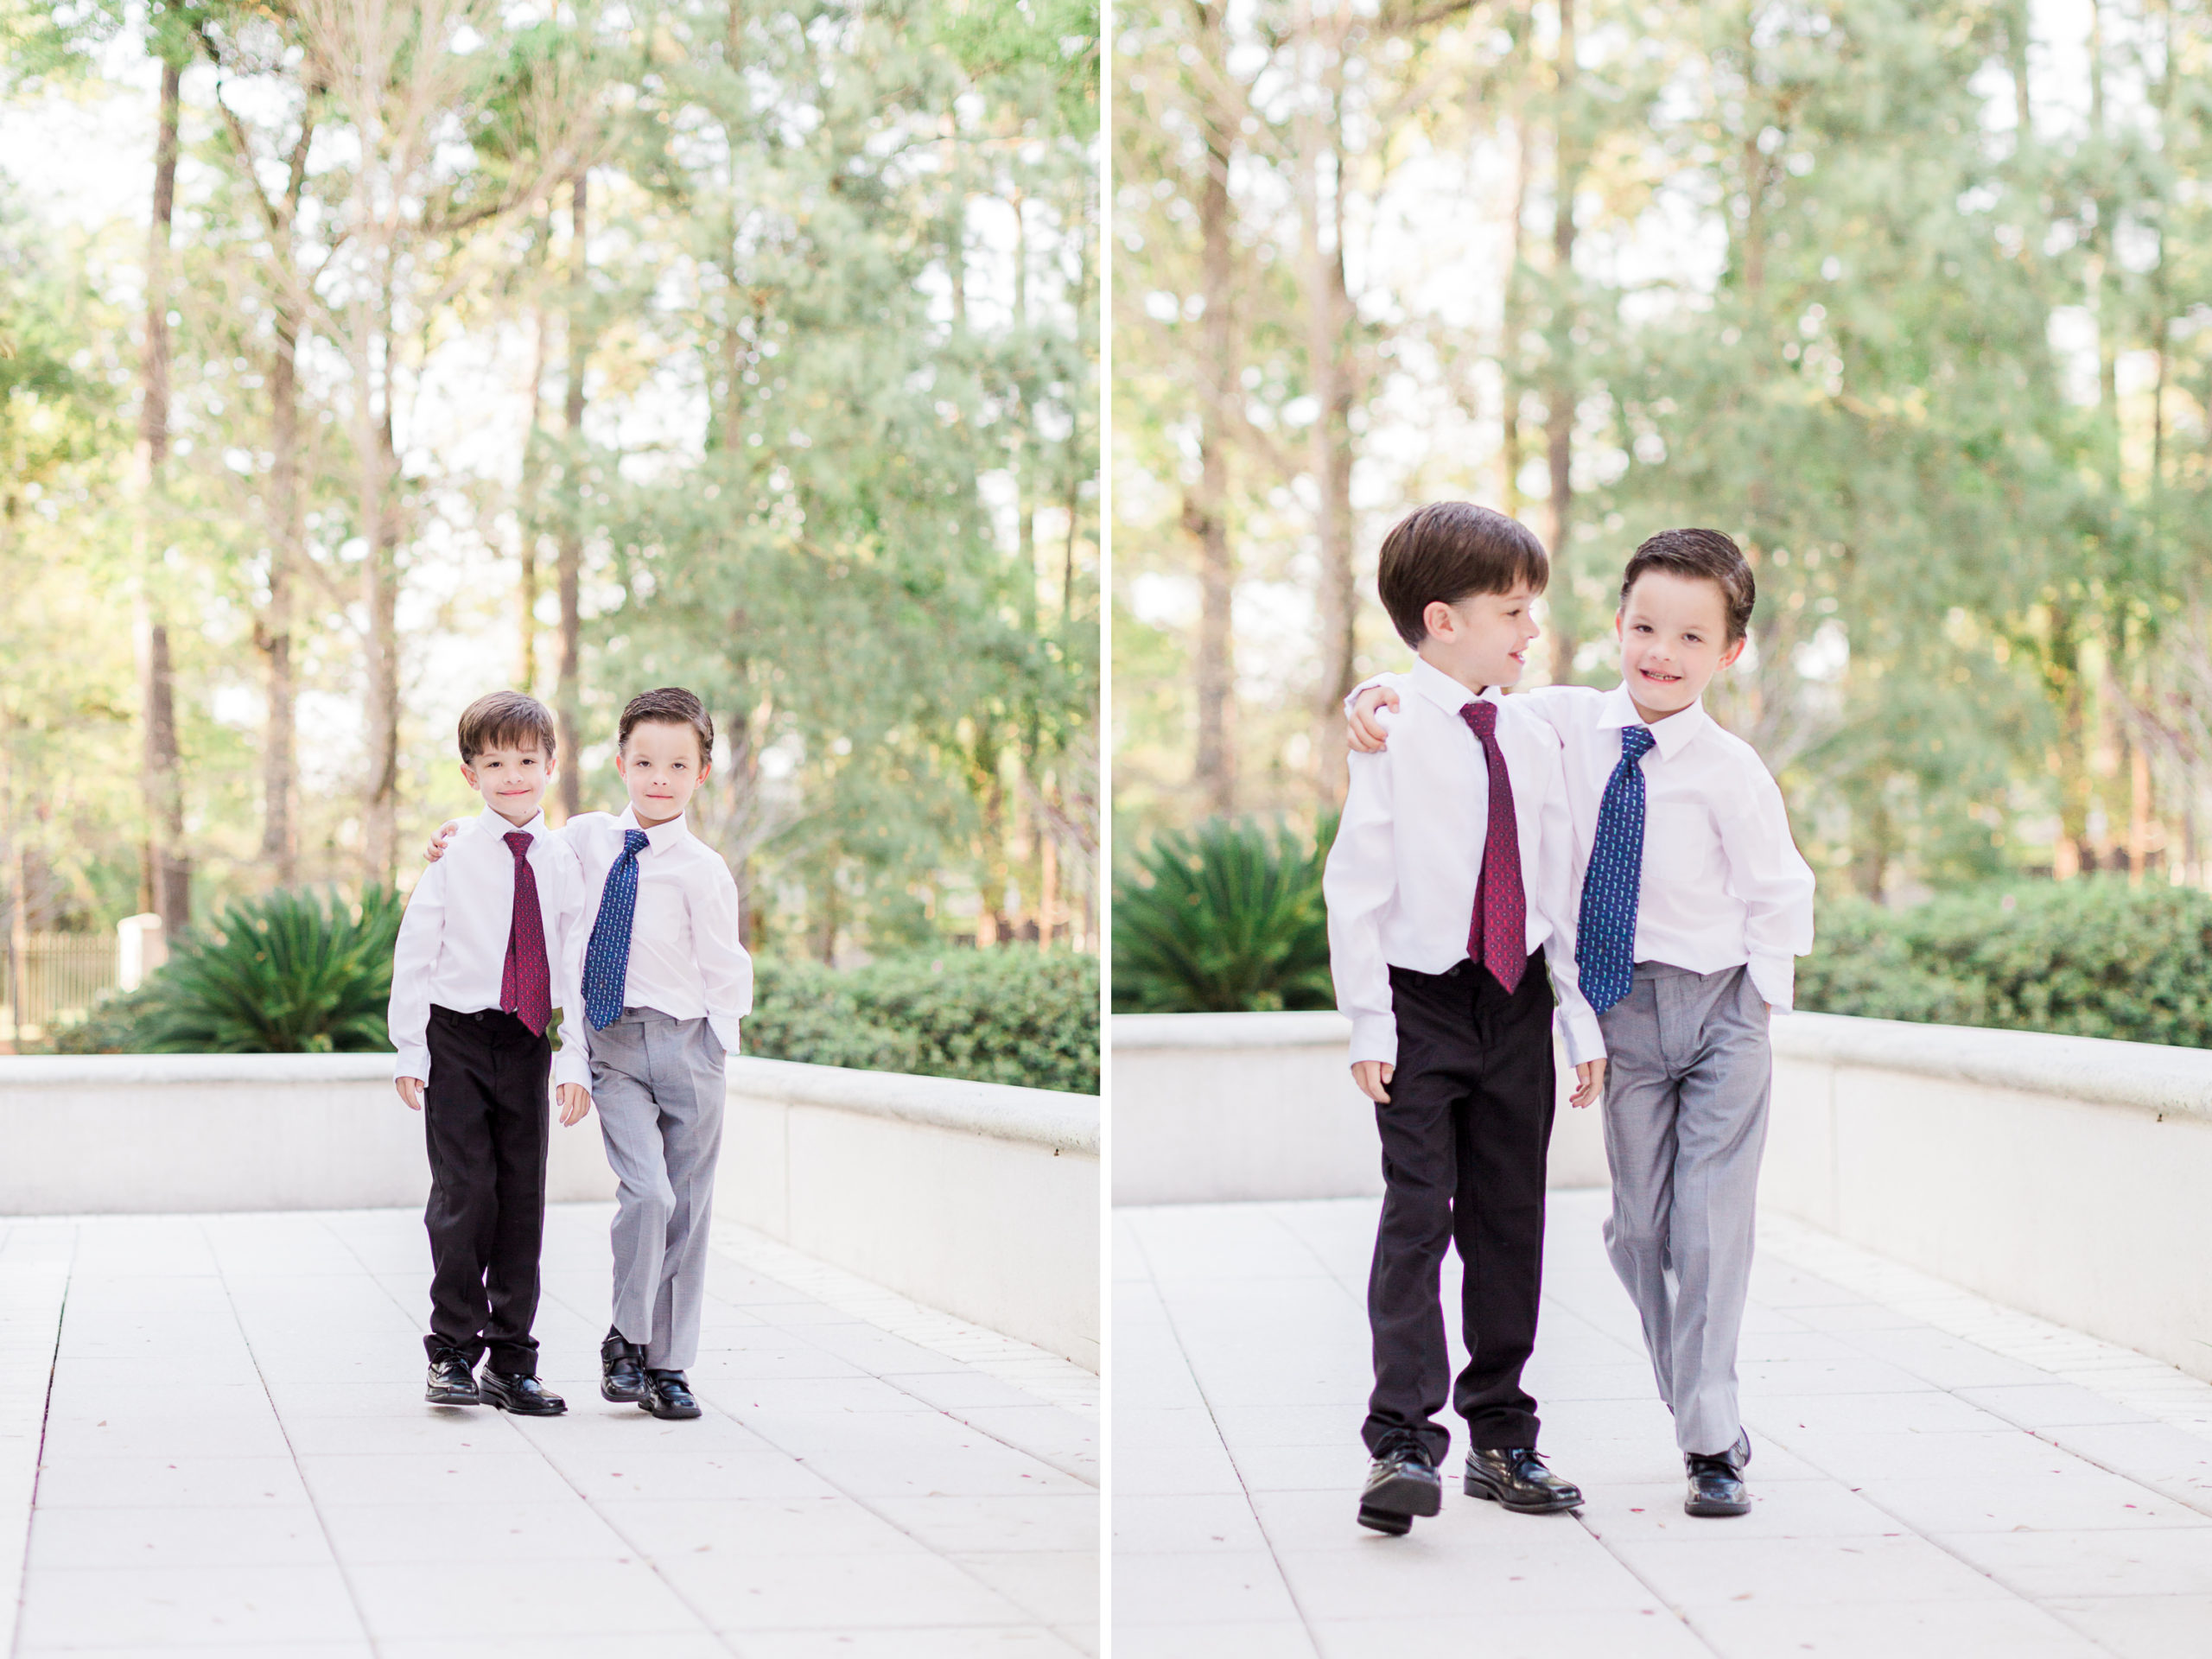 Sweet brothers walk next to each other through a lovely garden